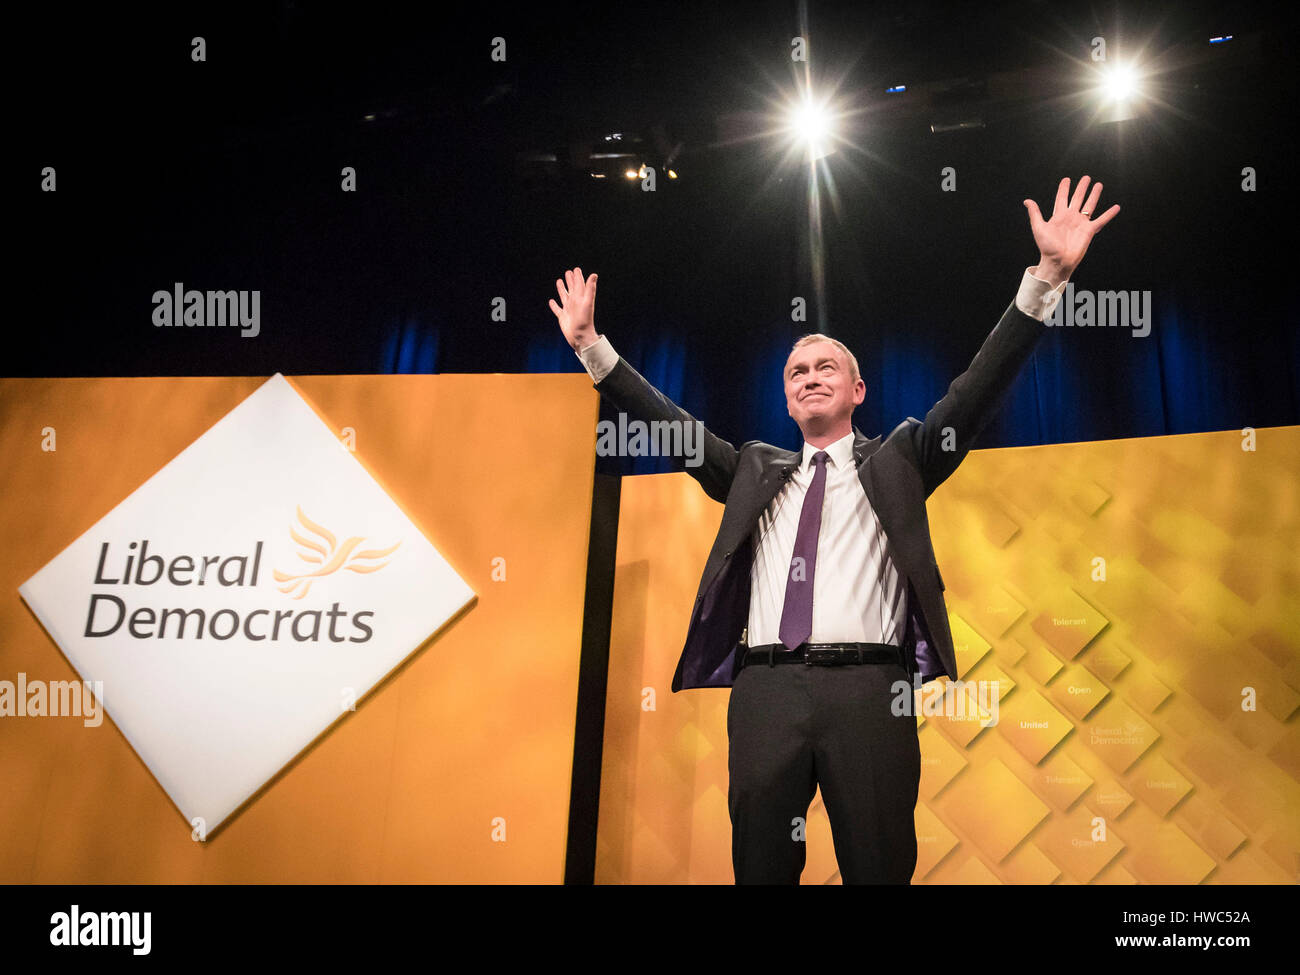 Leader of the Liberal Democrats Tim Farron following a keynote speech where he accused Theresa May of pursuing the same 'aggressive nationalistic' agenda as Donald Trump and Vladimir Putin, during the Liberal Democrat spring conference at the Barbican Centre in York. Stock Photo